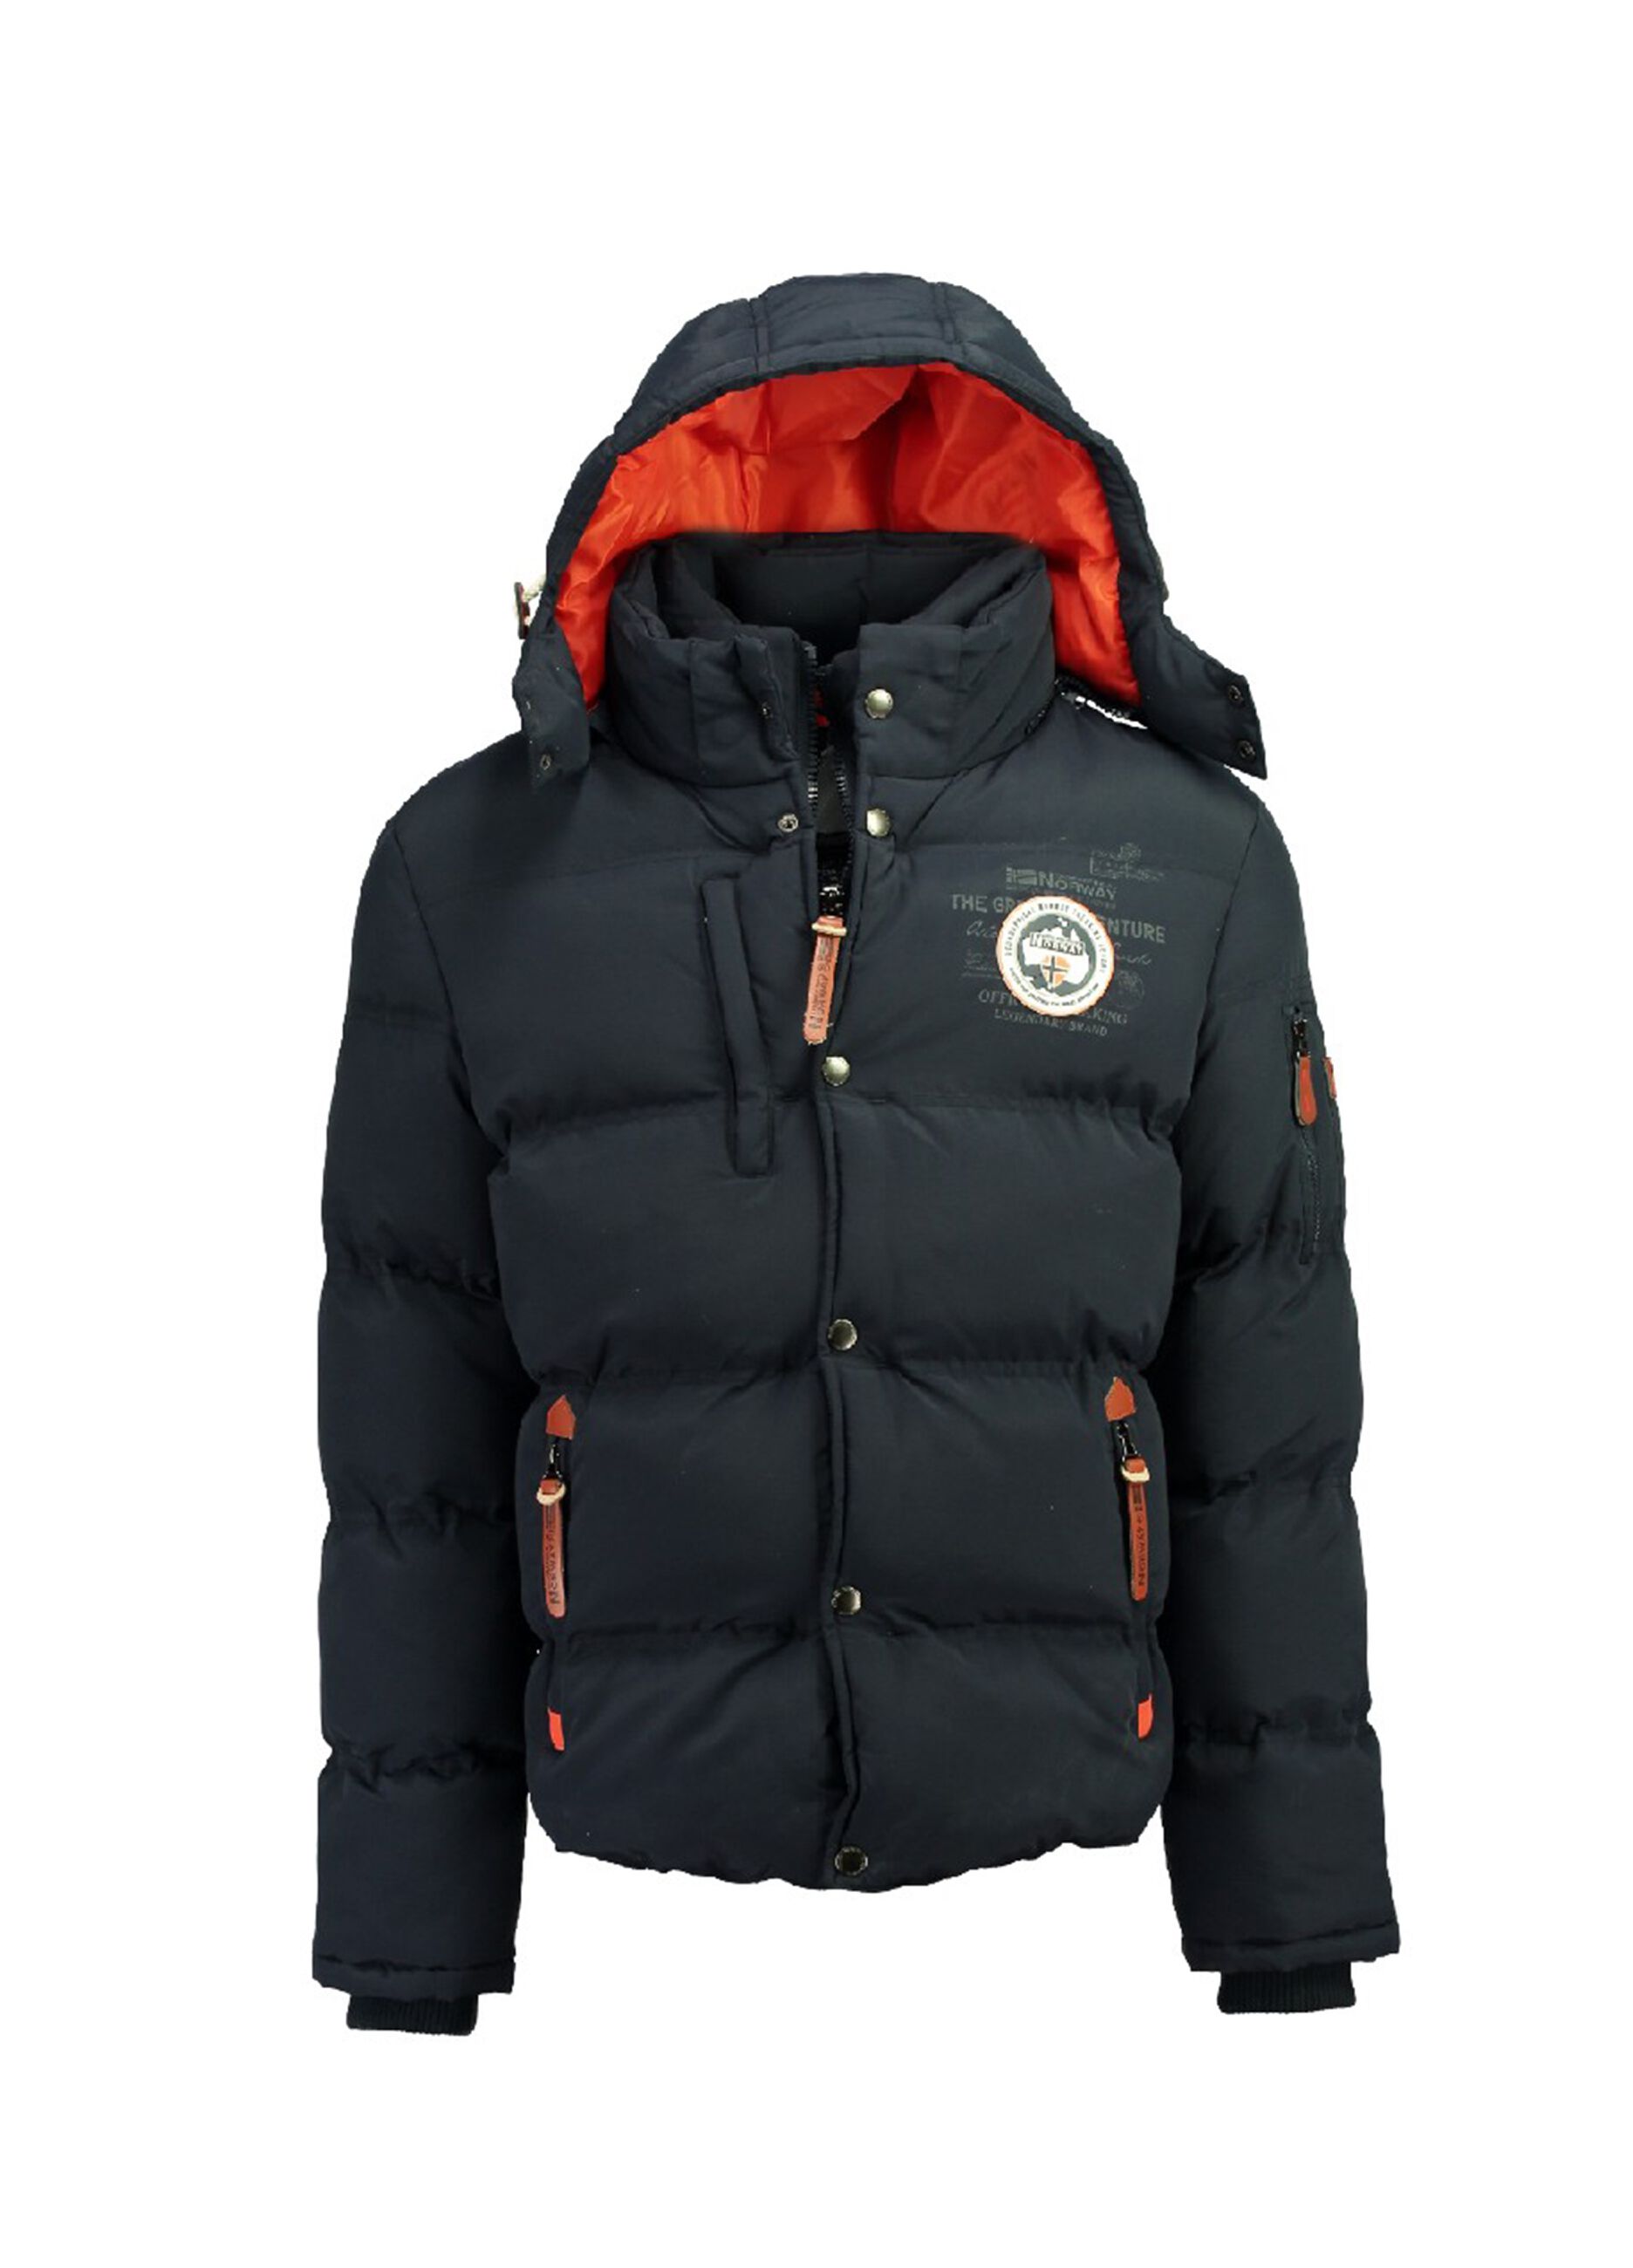 GEOGRAPHICAL NORWAY Man's Navy Blue Geographical Norway down